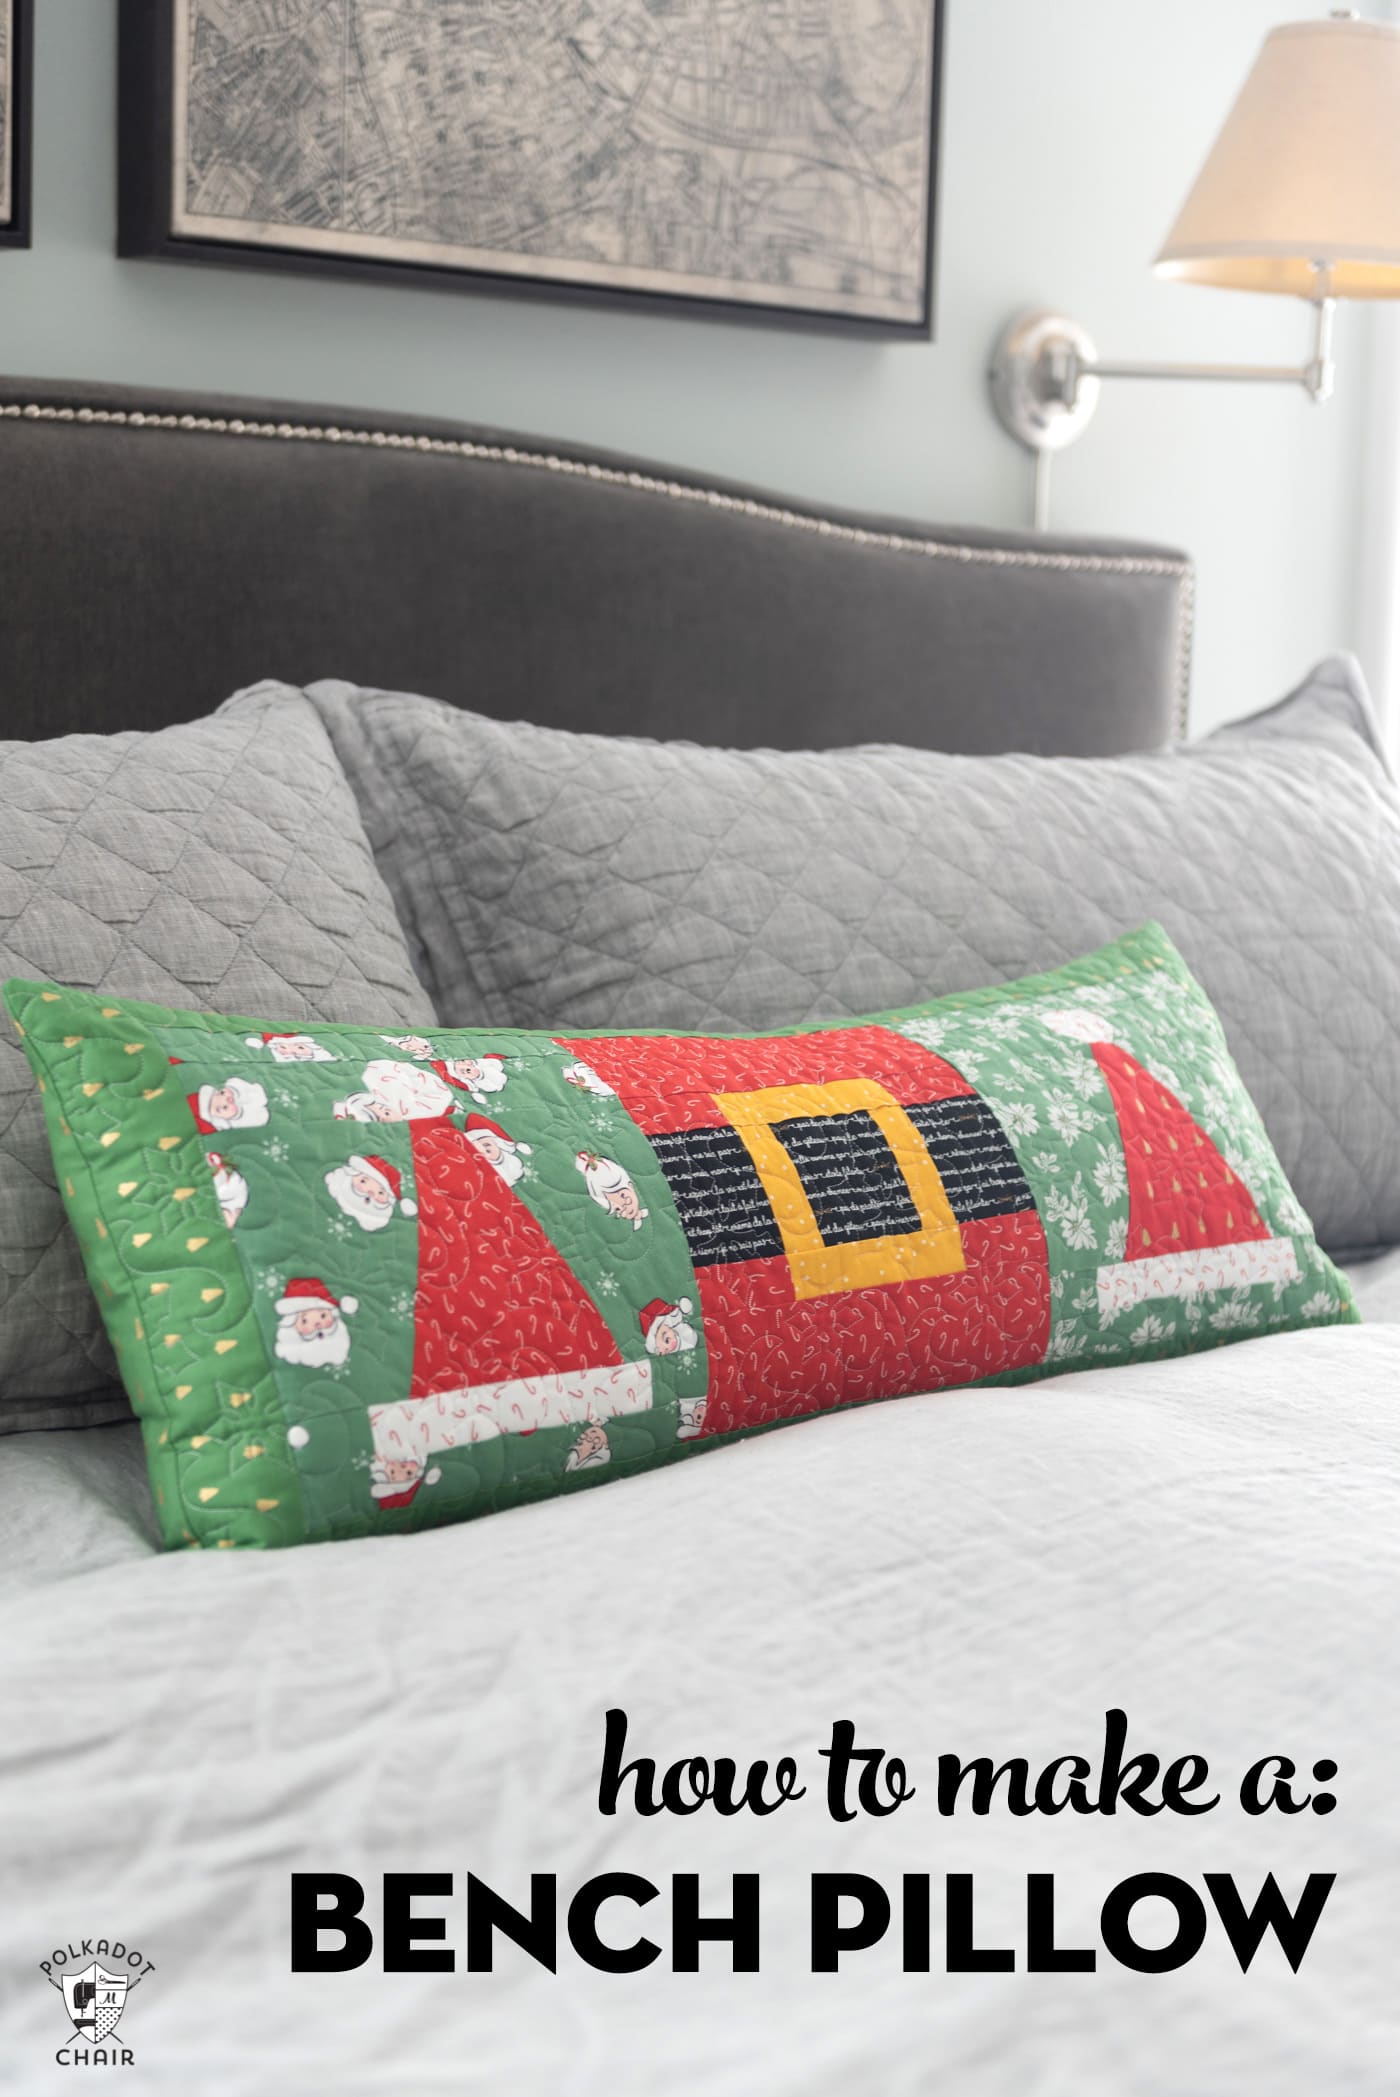 How to Make a Bench Pillow using your Favorite Quilt Blocks